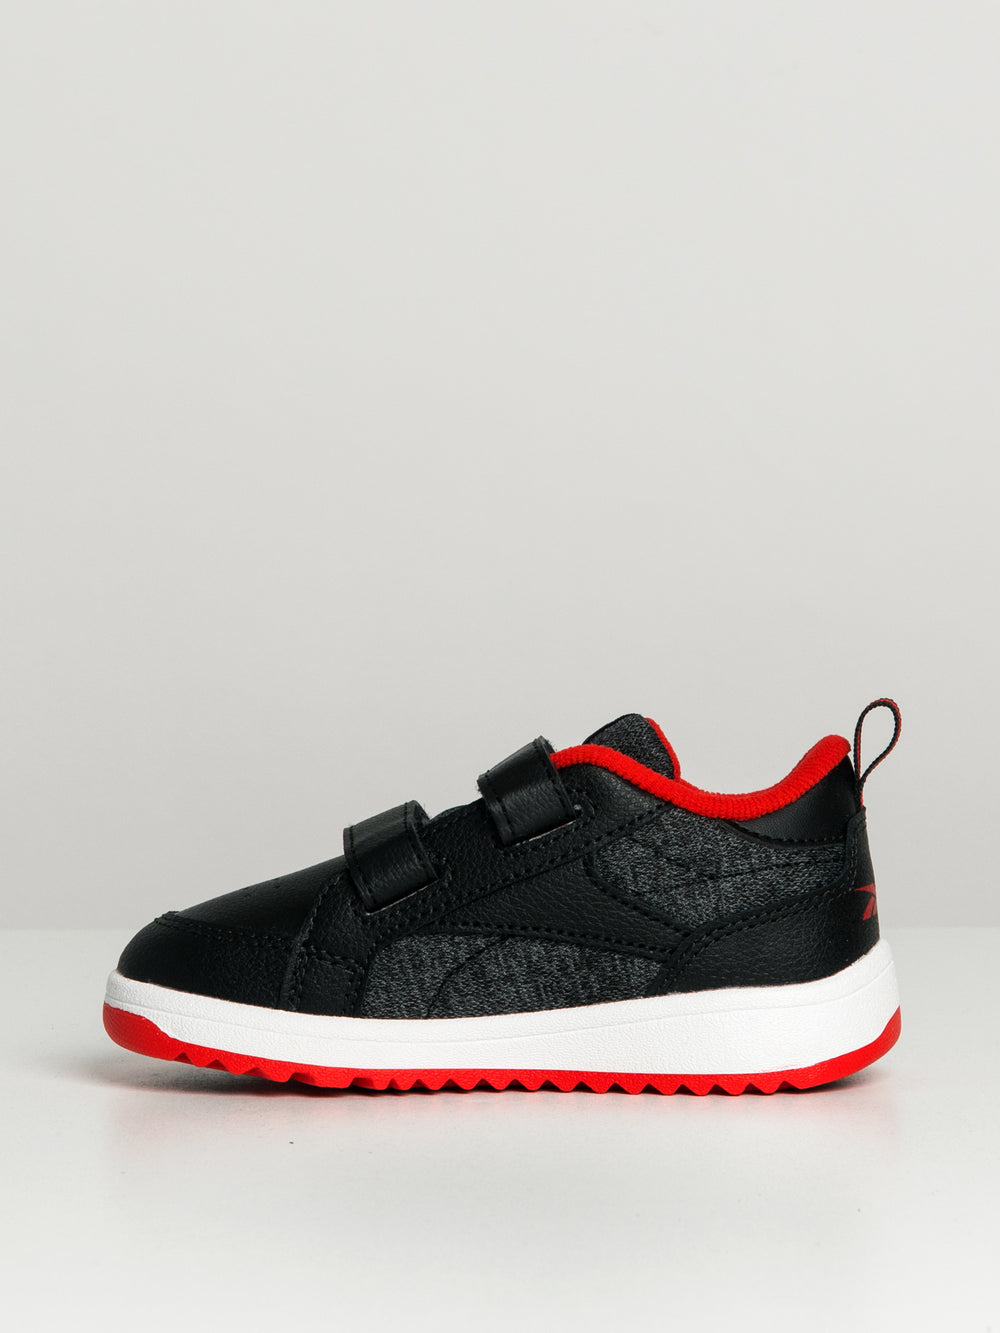 KIDS REEBOK TODDLER RBK CLASP LOW - CLEARANCE